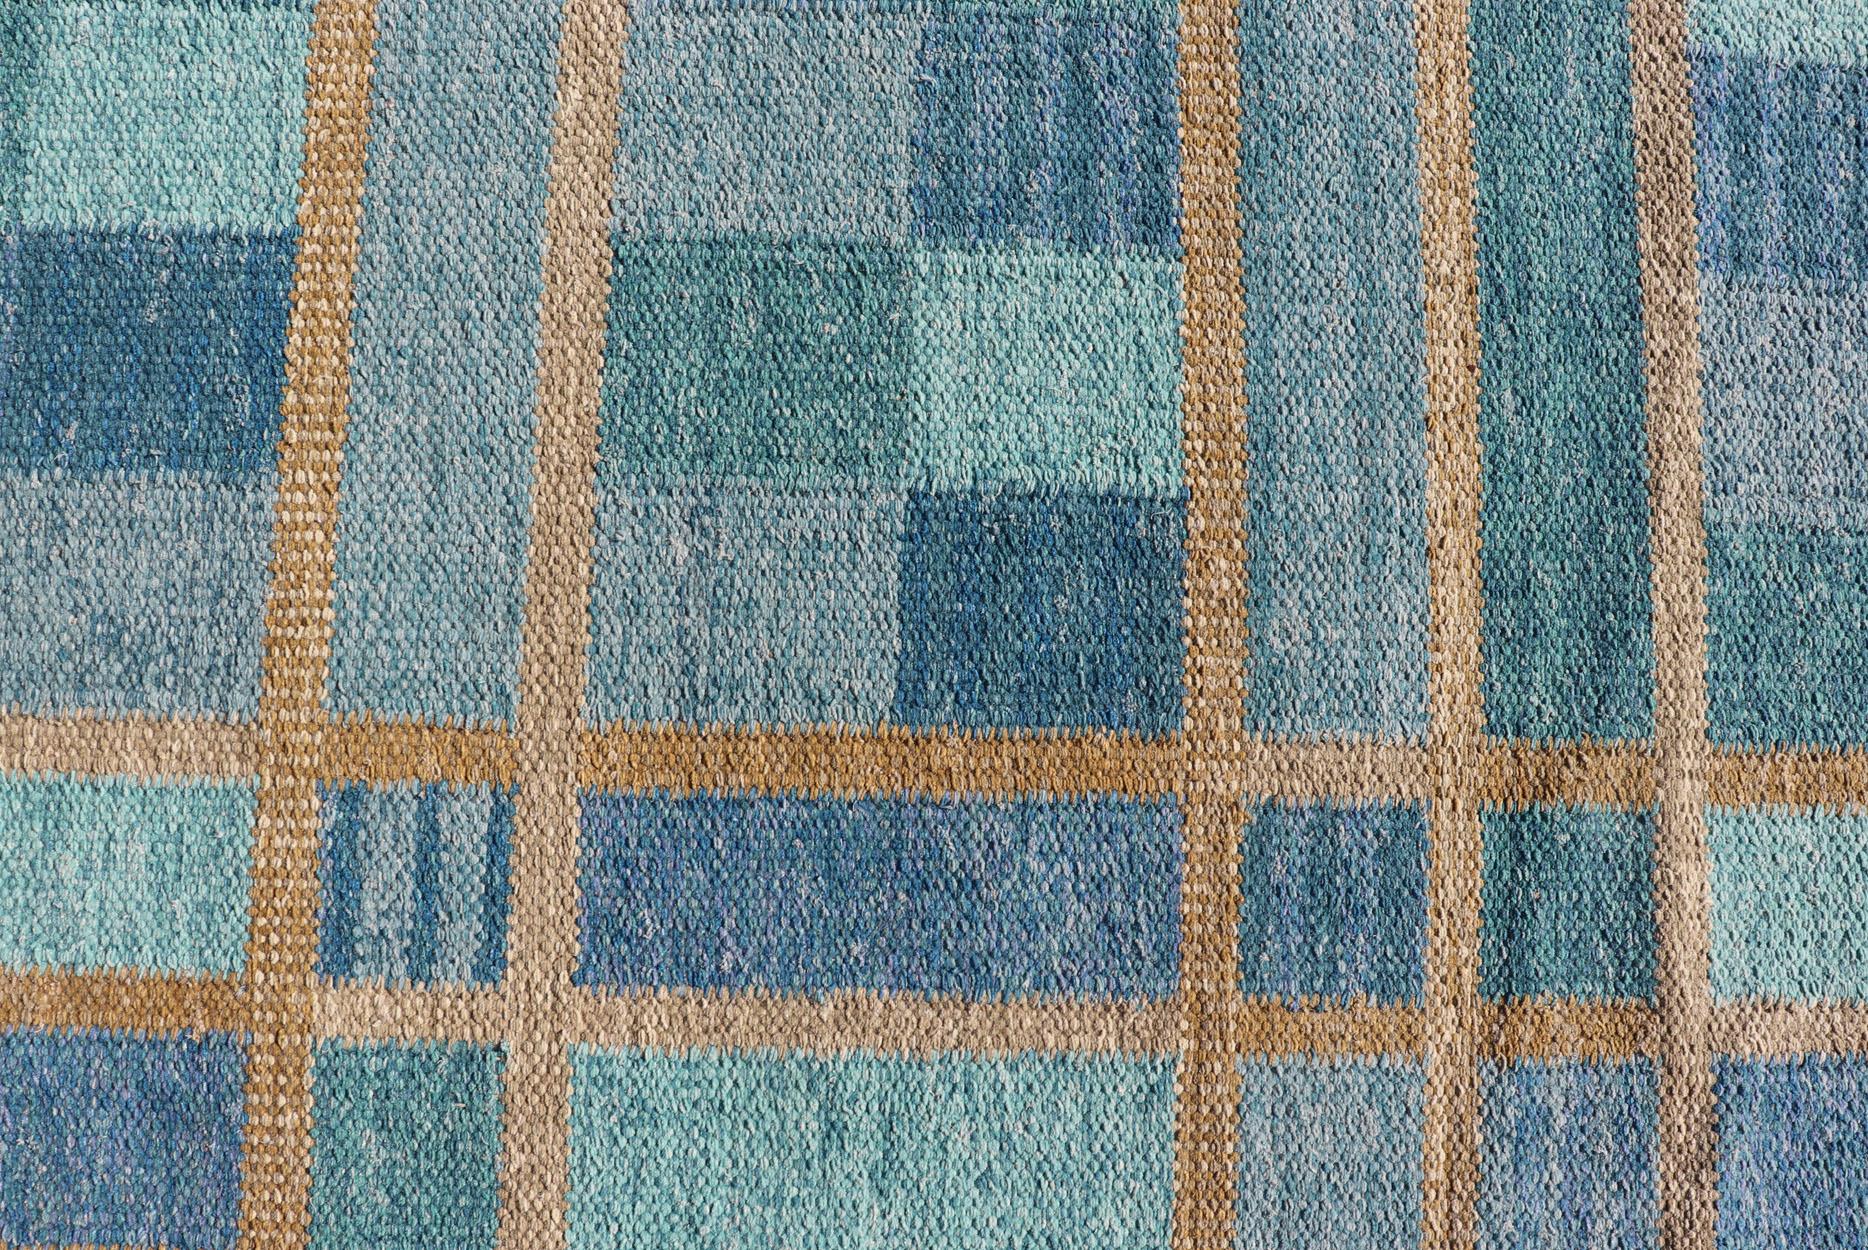 Hand-Woven Large Scandinavian Inspired Design Rug in Blue, Teal, Green, and Gold